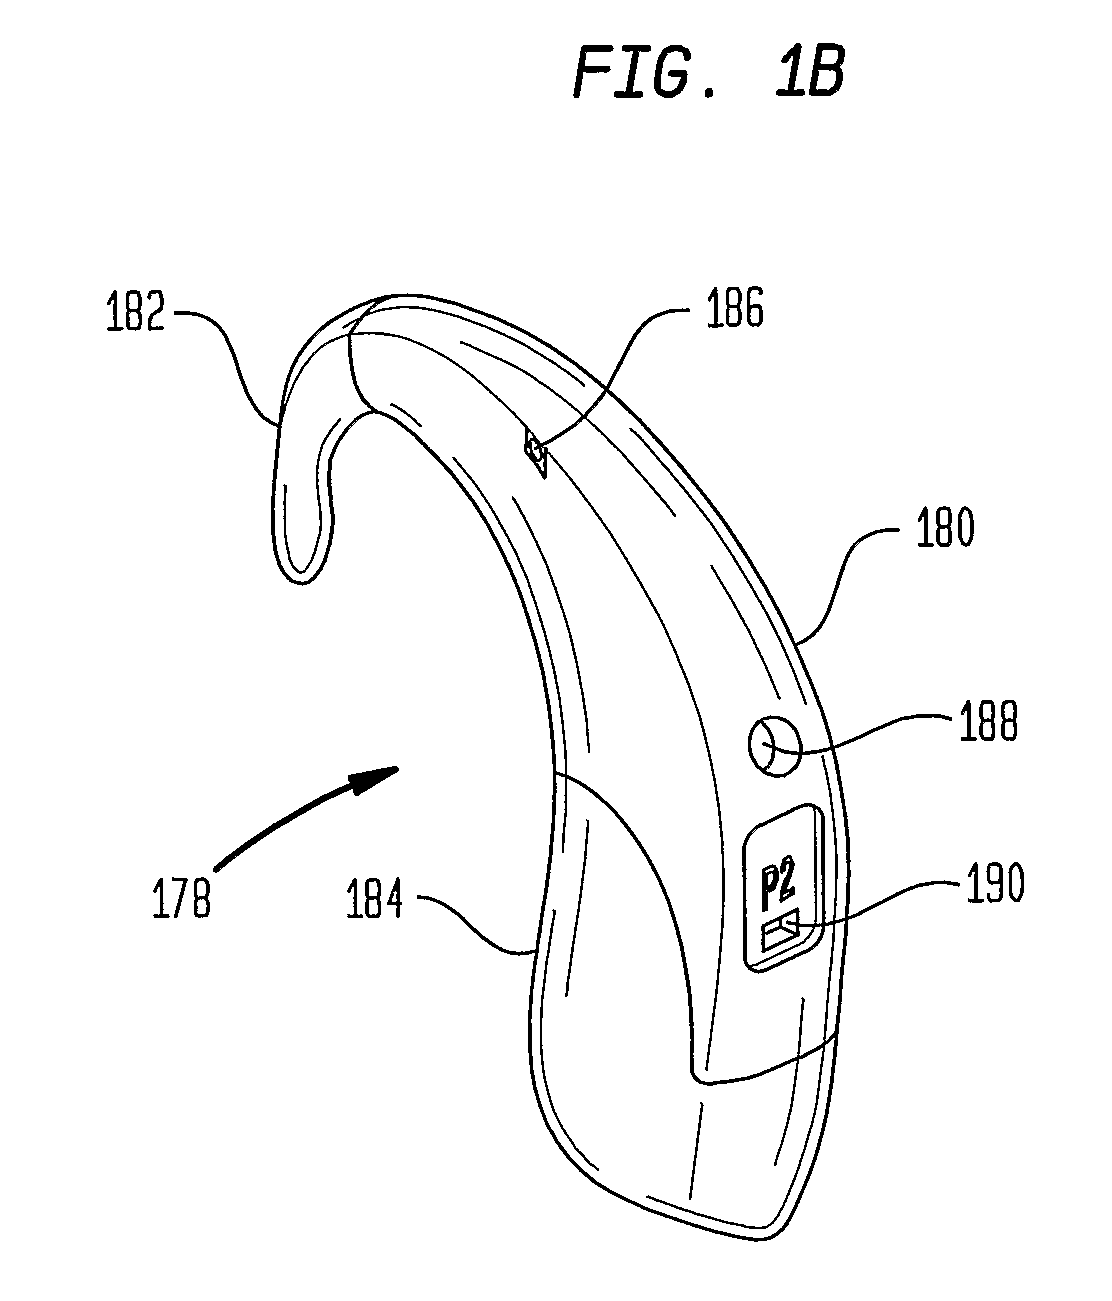 Transformable speech processor module for a hearing prosthesis